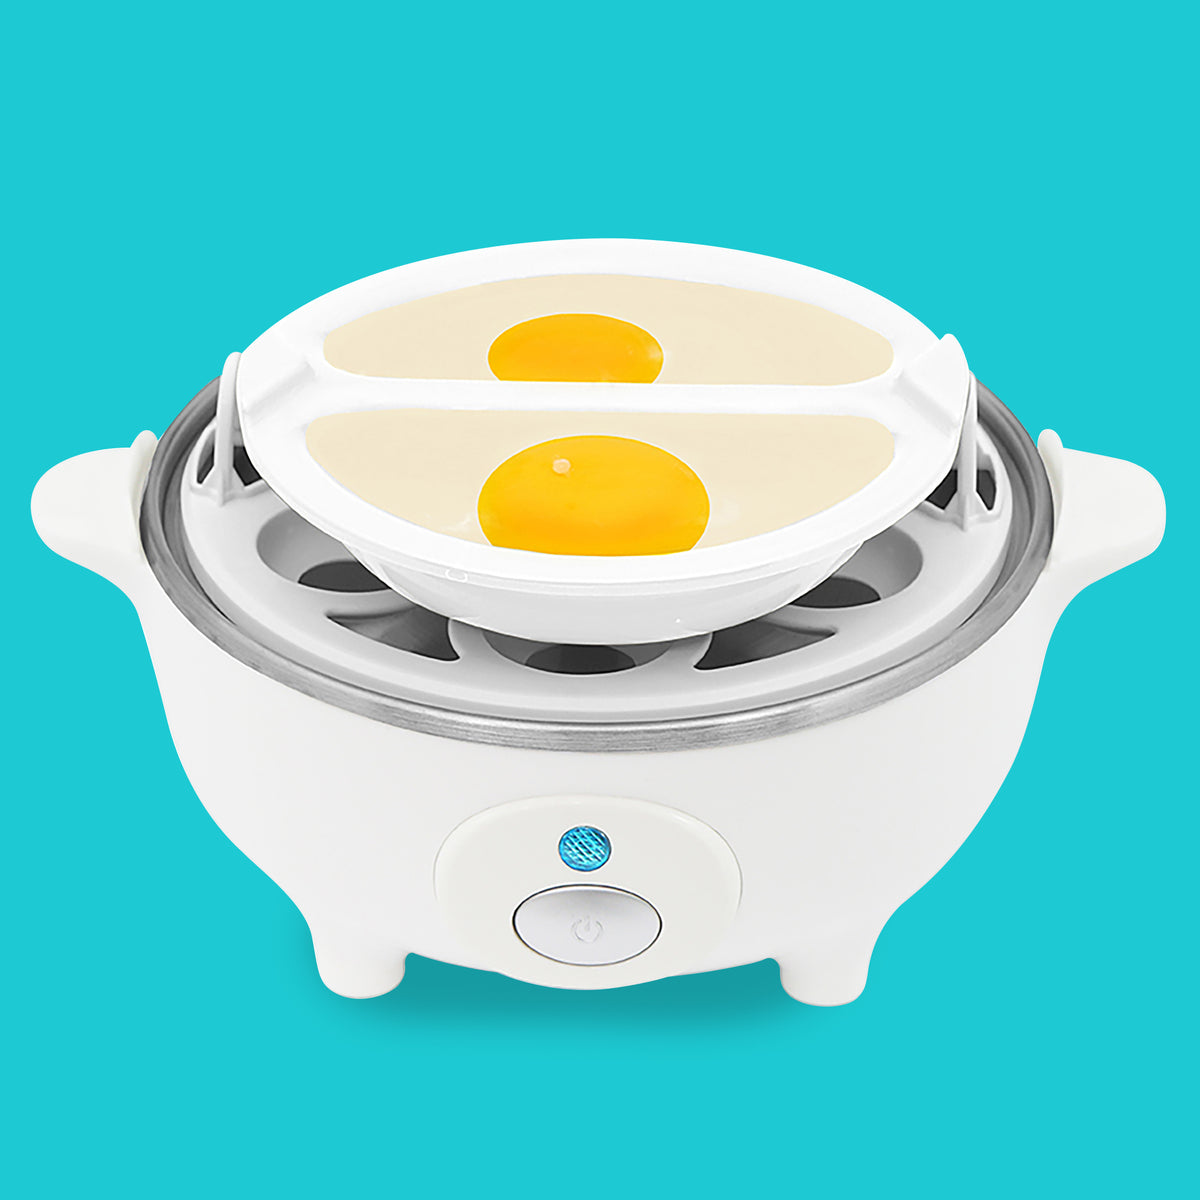 Elite Platinum Stainless Steel Automatic Easy Egg Cooker - Silver